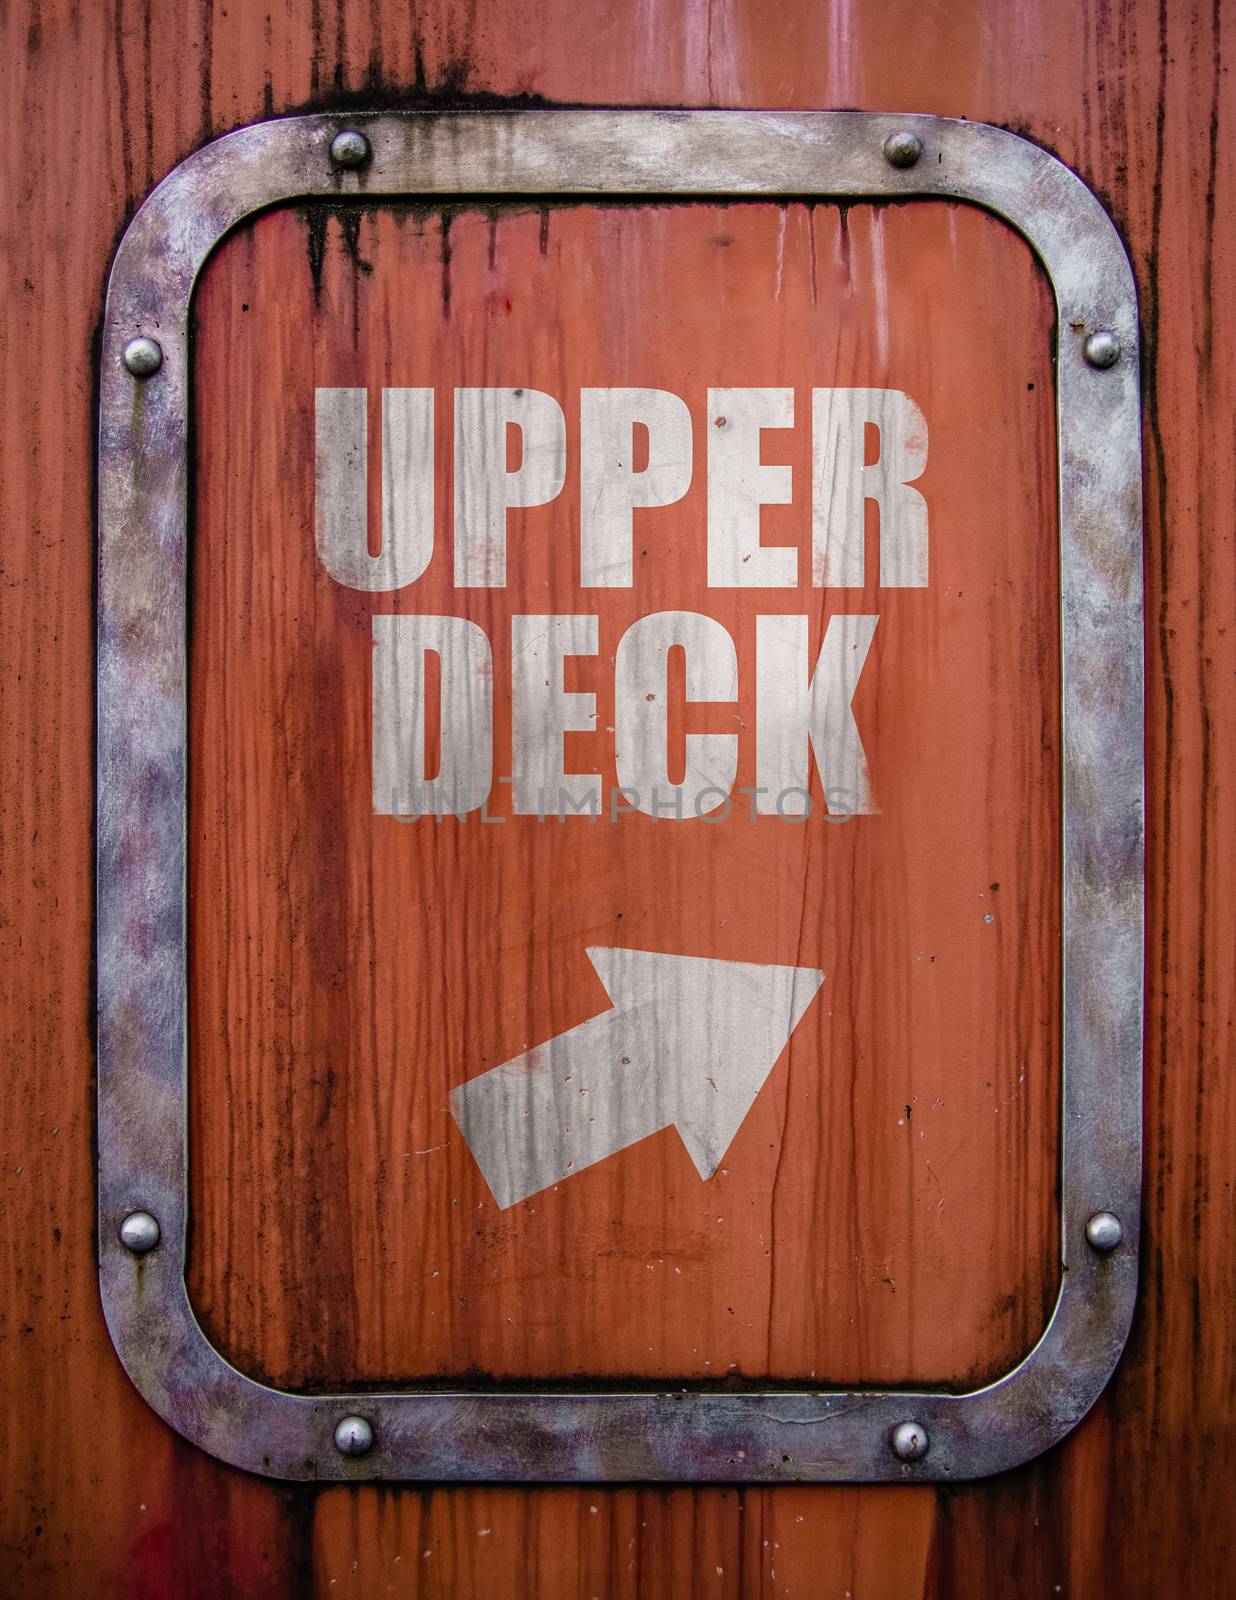 Travel Image Of A Grungy Upper Deck Sign On A Ship Or Ferry